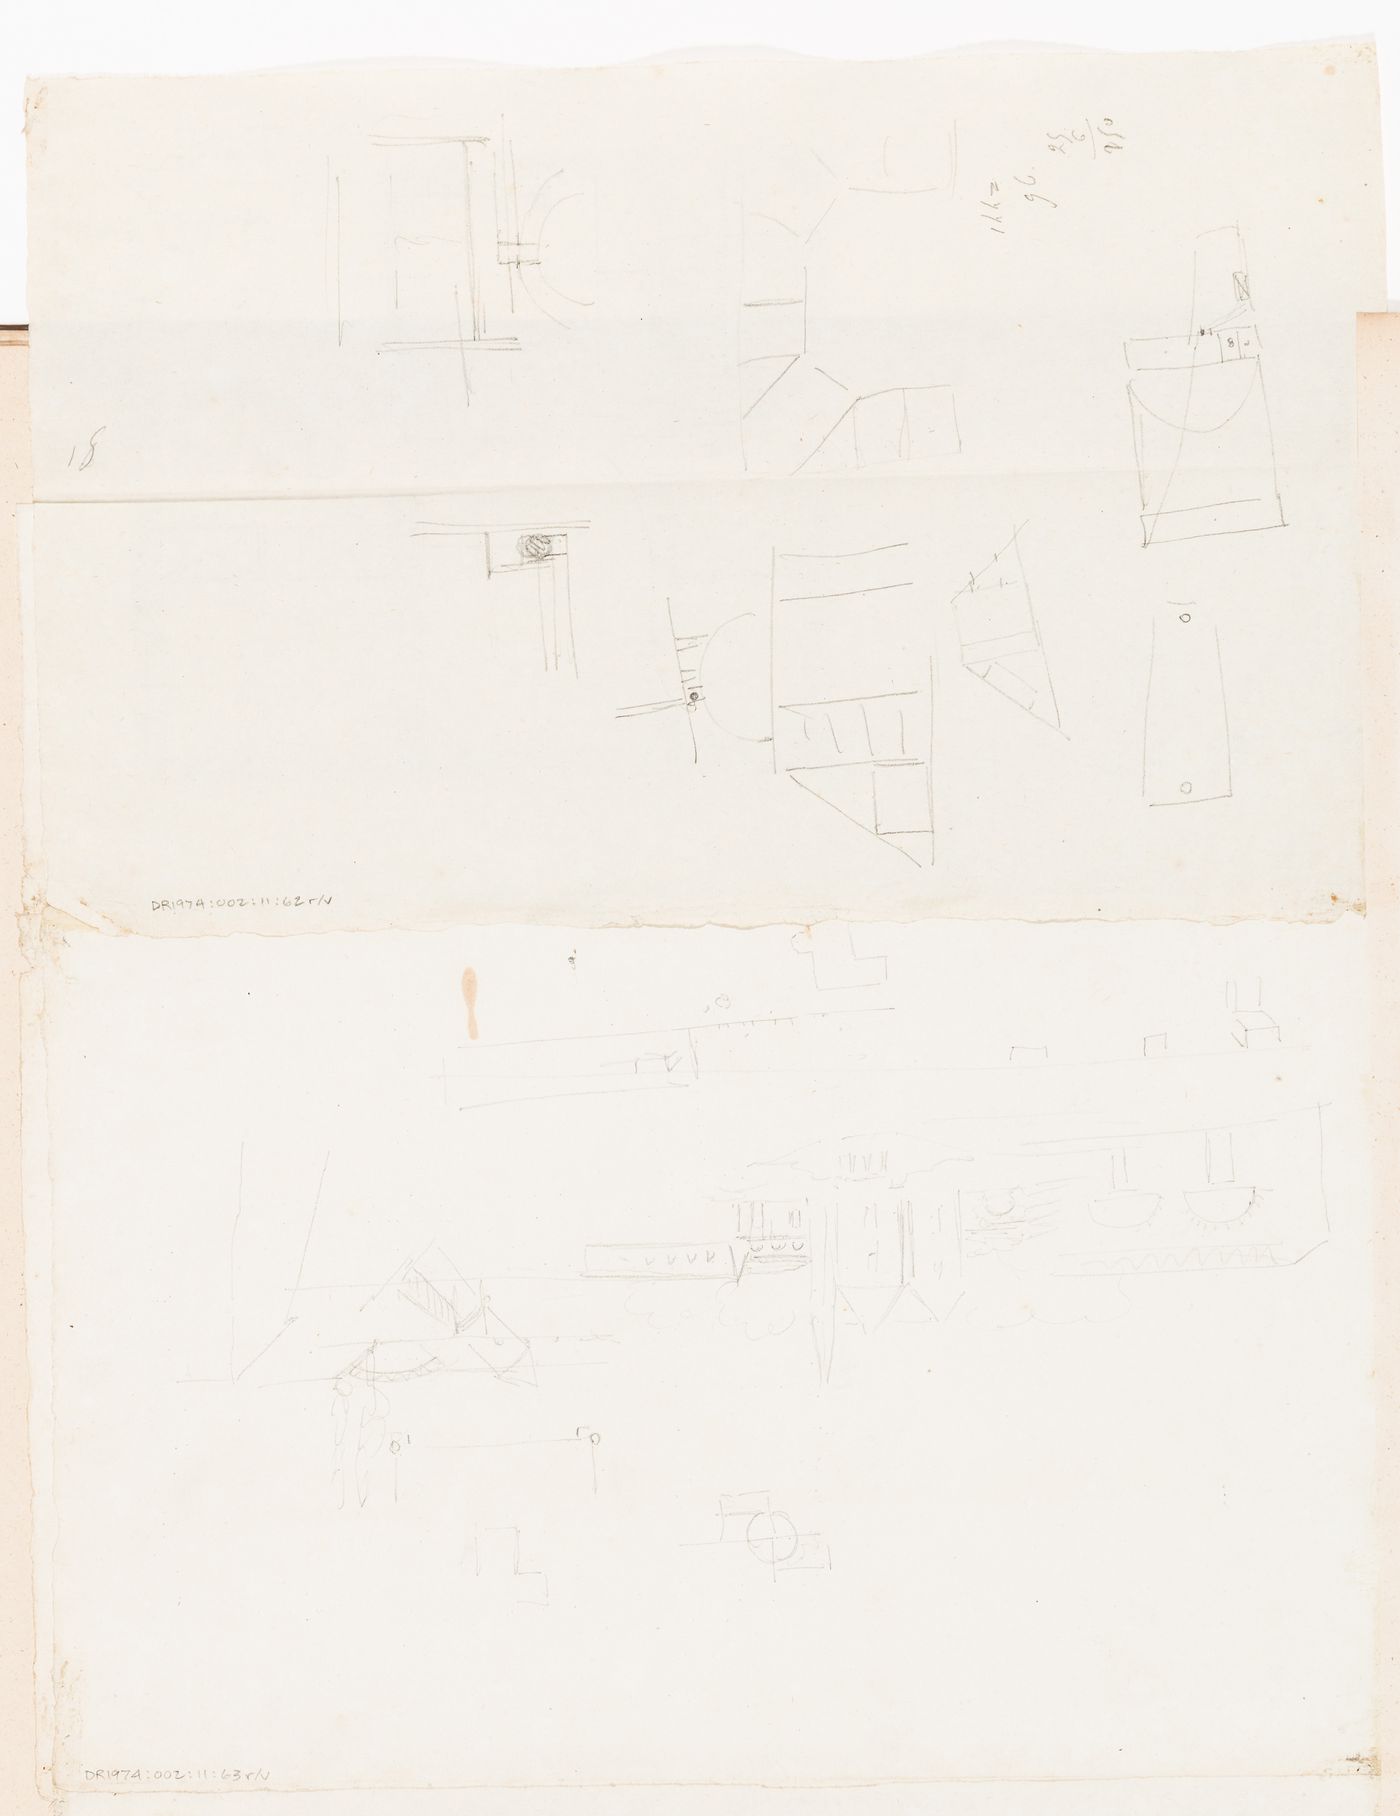 Rohault de Fleury House, 12-14 rue d'Aguesseau, Paris: Plan, probably for the first floor; verso: Sketches of an unidentified building